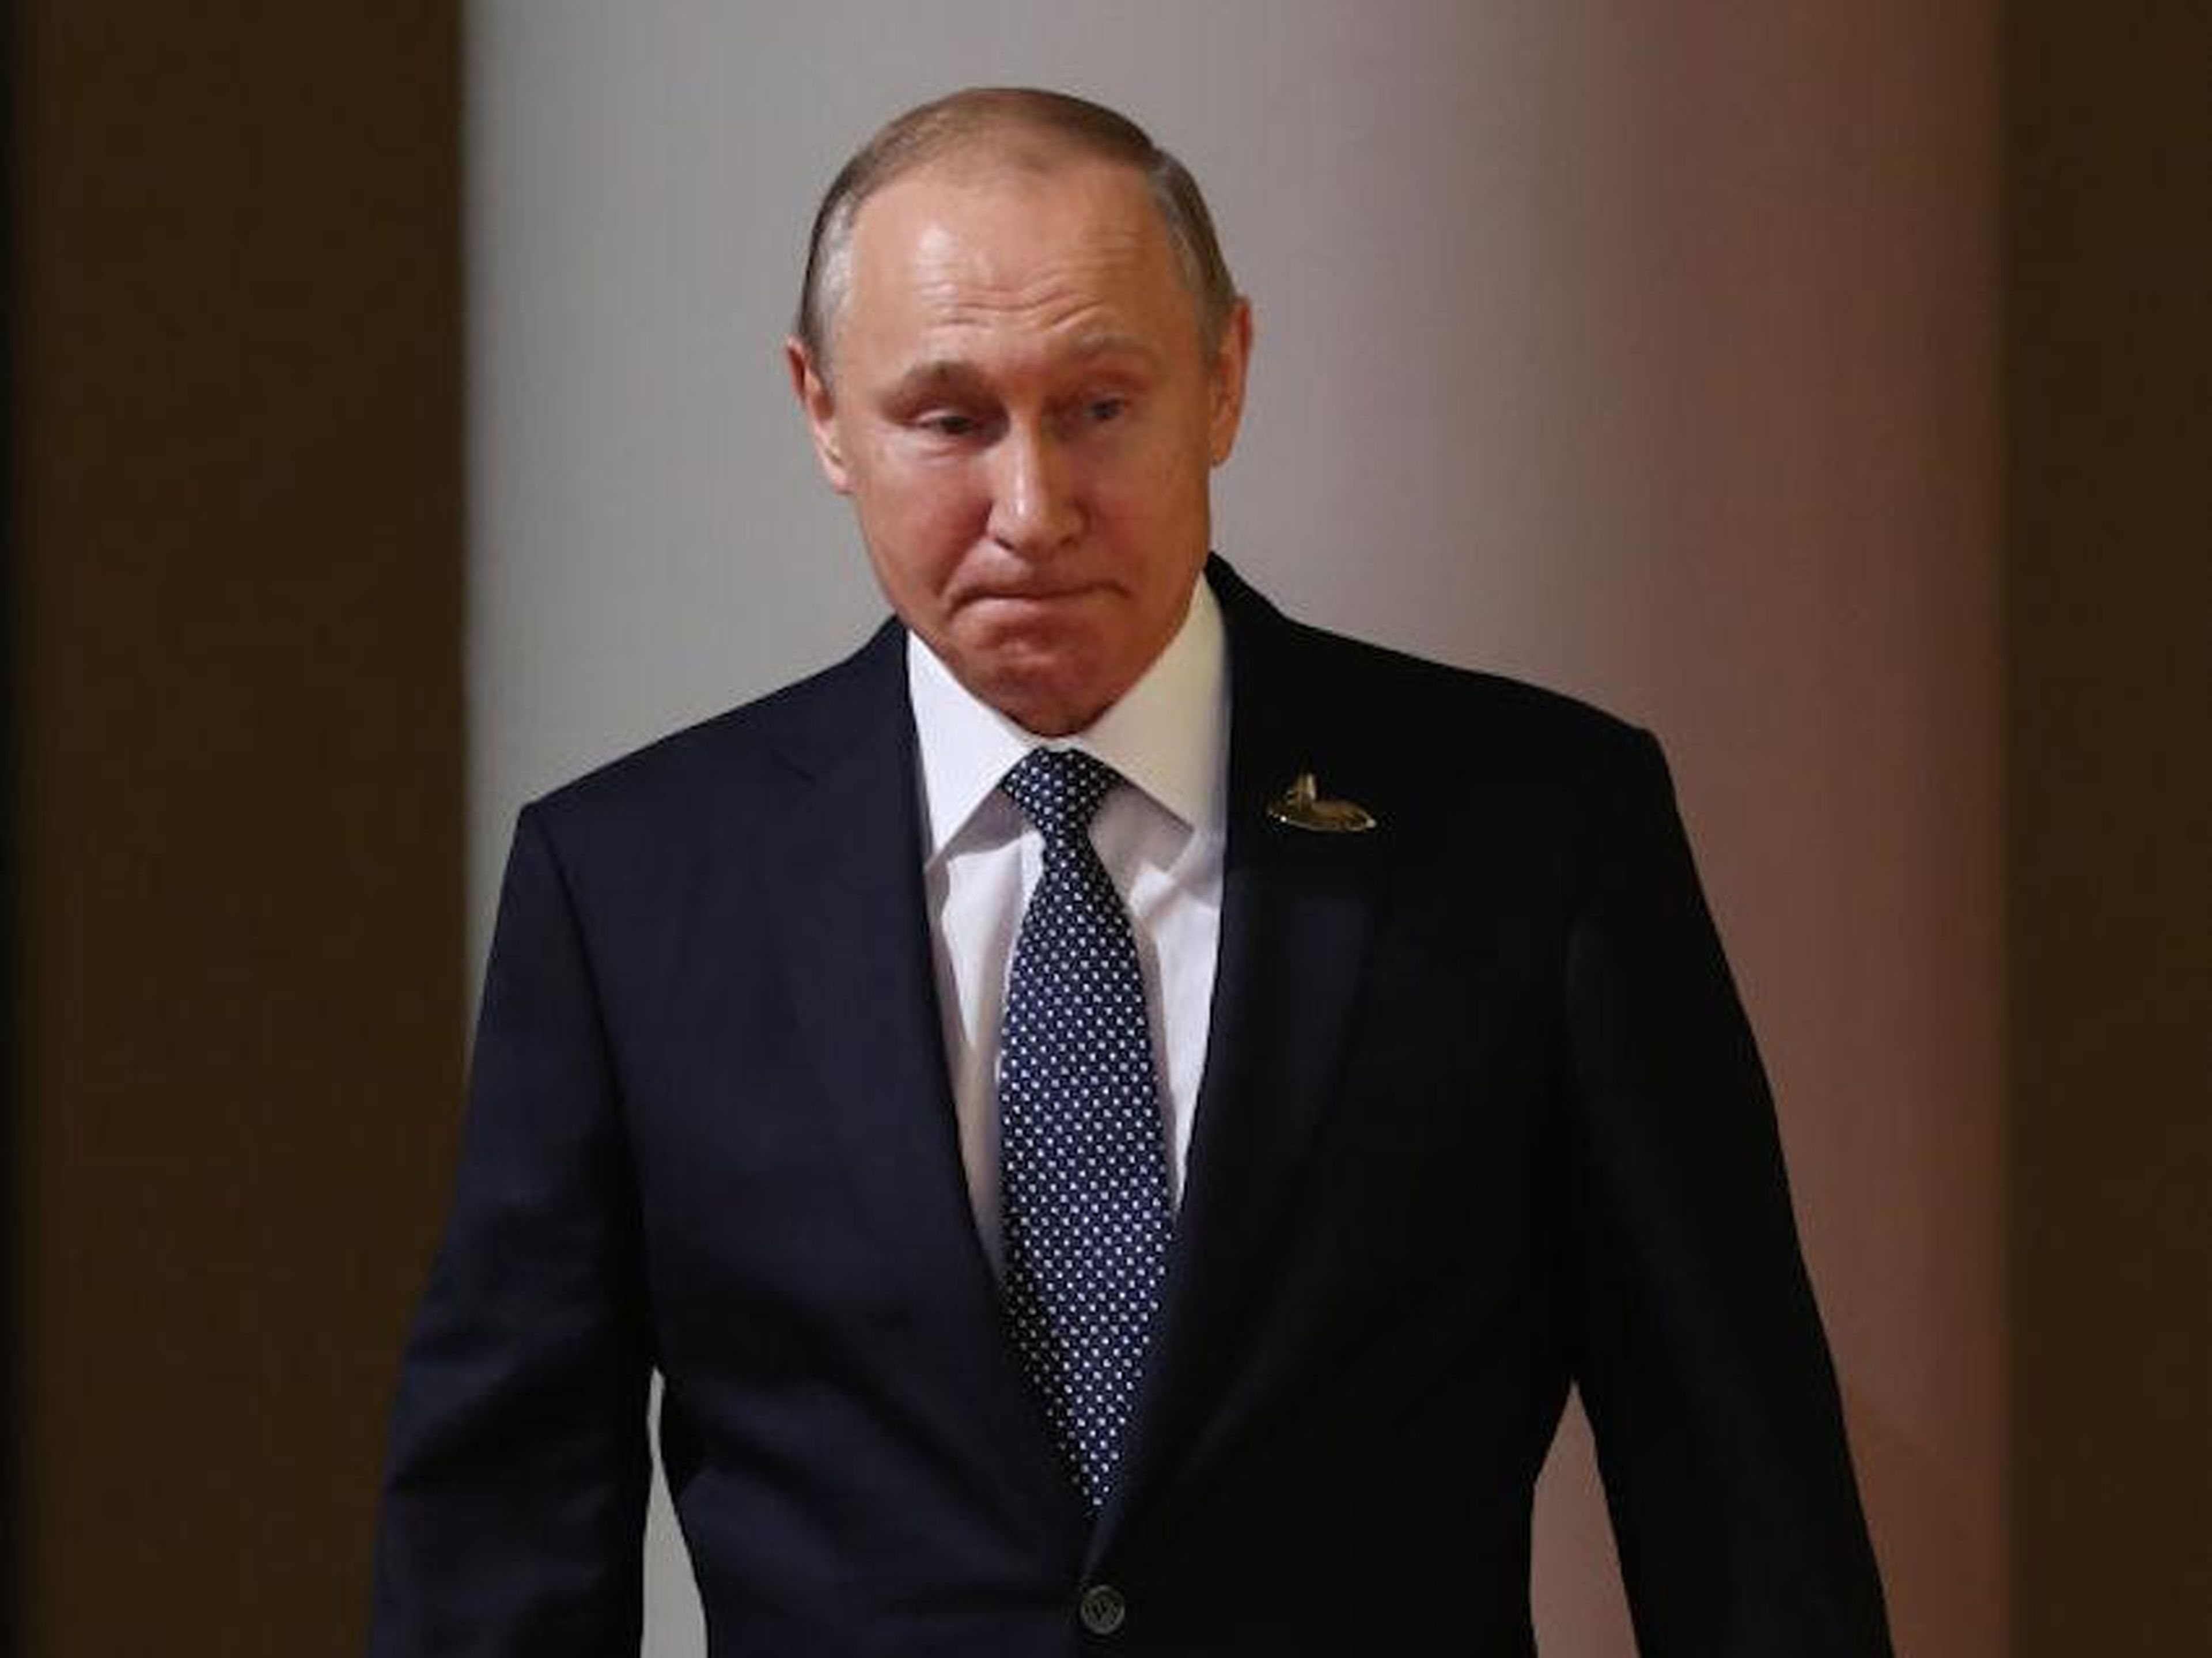 According to "Russia Beyond the Headlines", Putin also has a stylist who has been dressing him for over 10 years. “The stylist rips off all the labels from his clothes, so these do not accidentally catch the eyes of journalists."